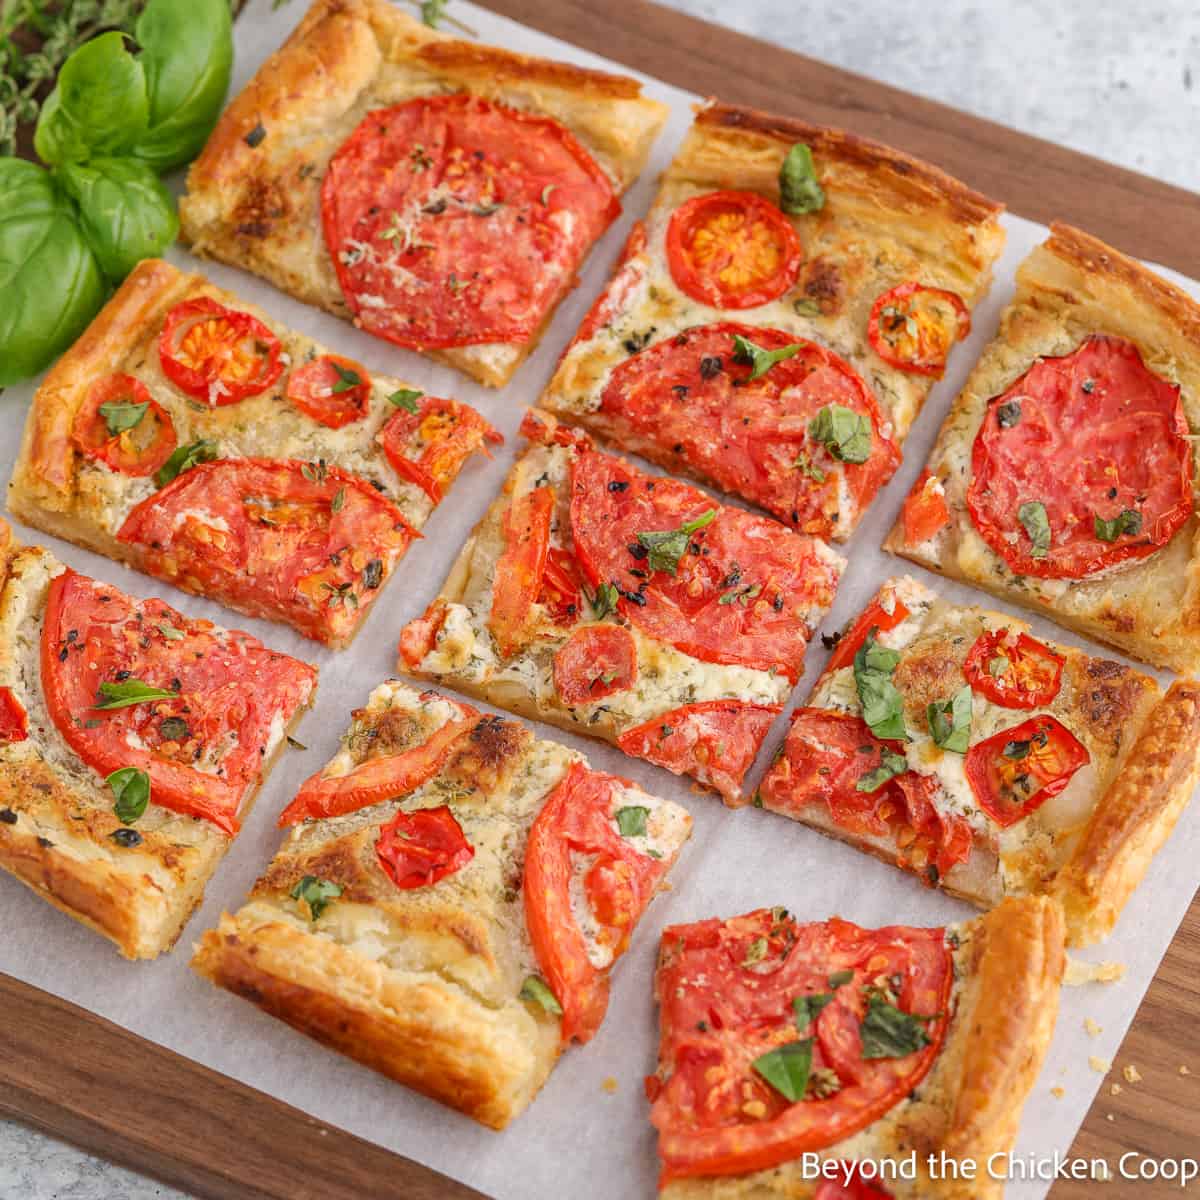 A tomato tart cut into nine pieces on a wooden board.